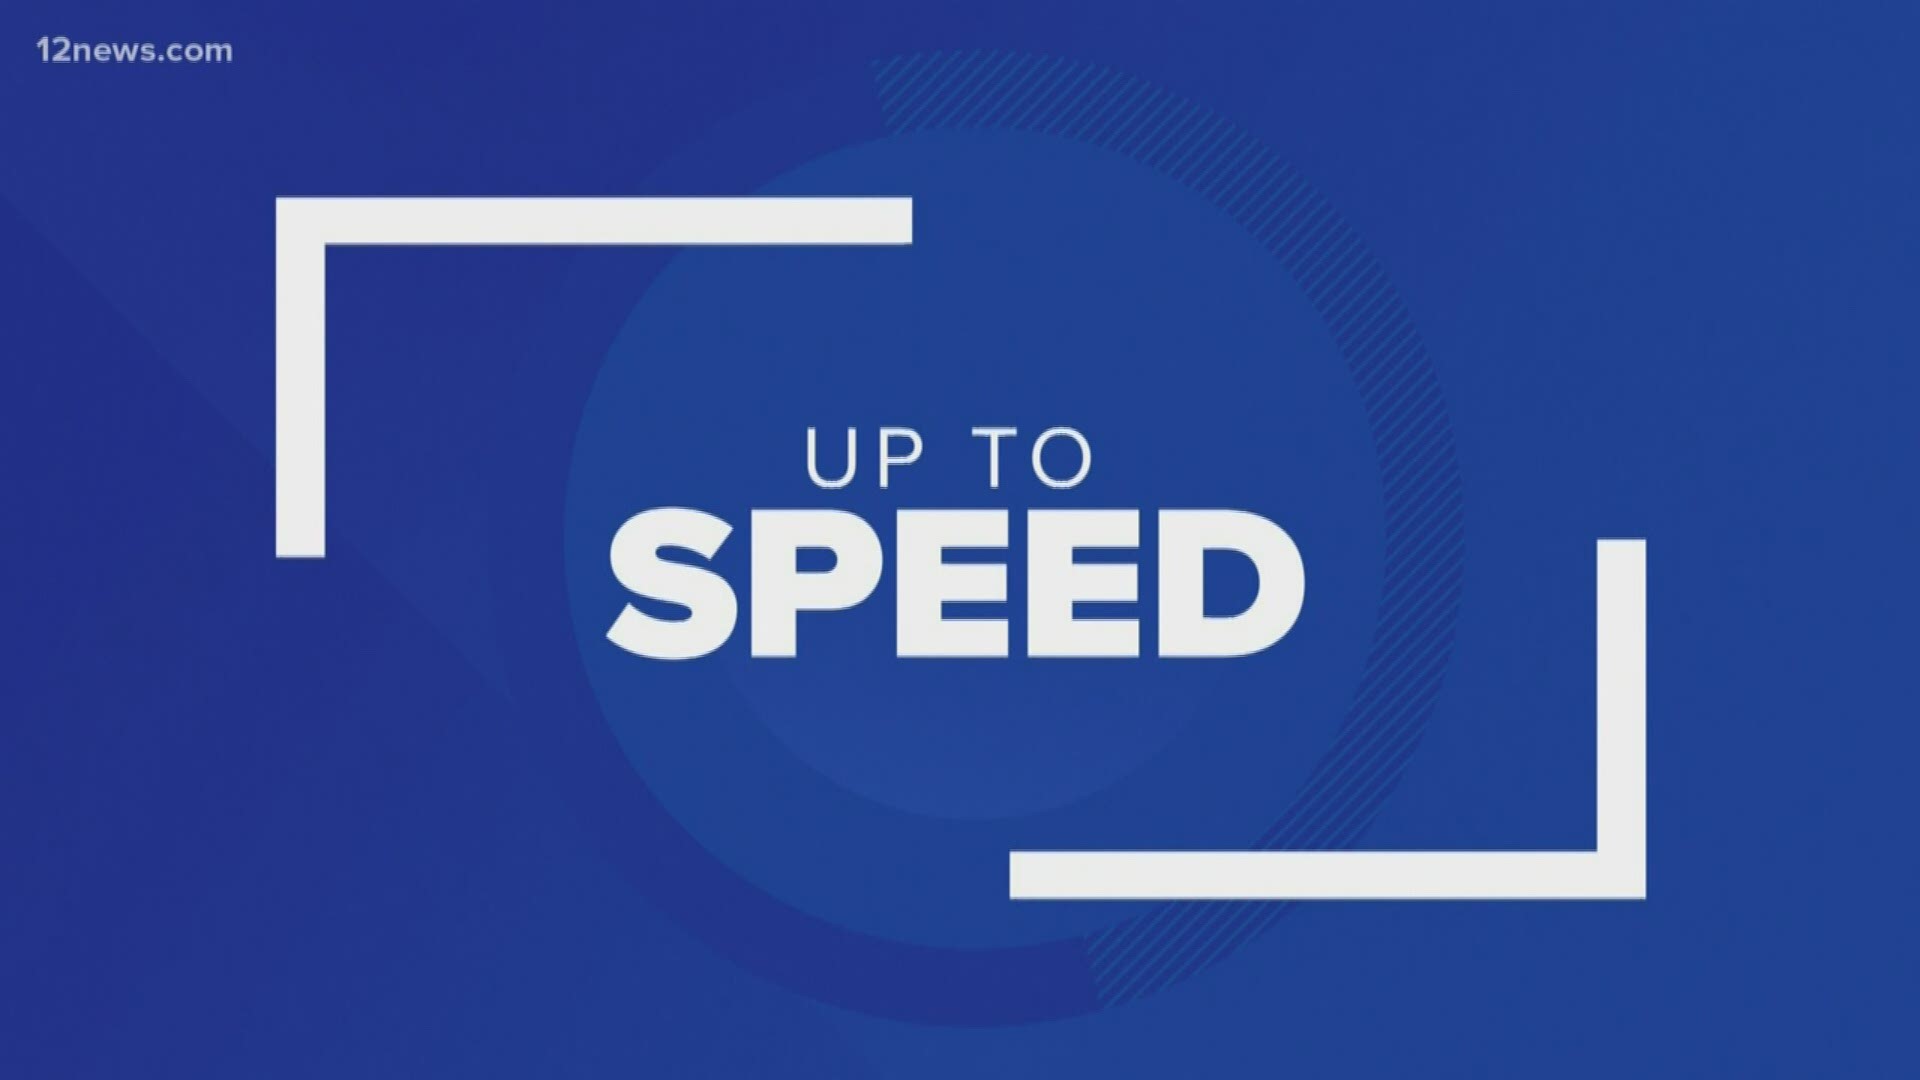 Get "Up to Speed" on the latest news happening around the Valley and across the country on Wednesday afternoon.